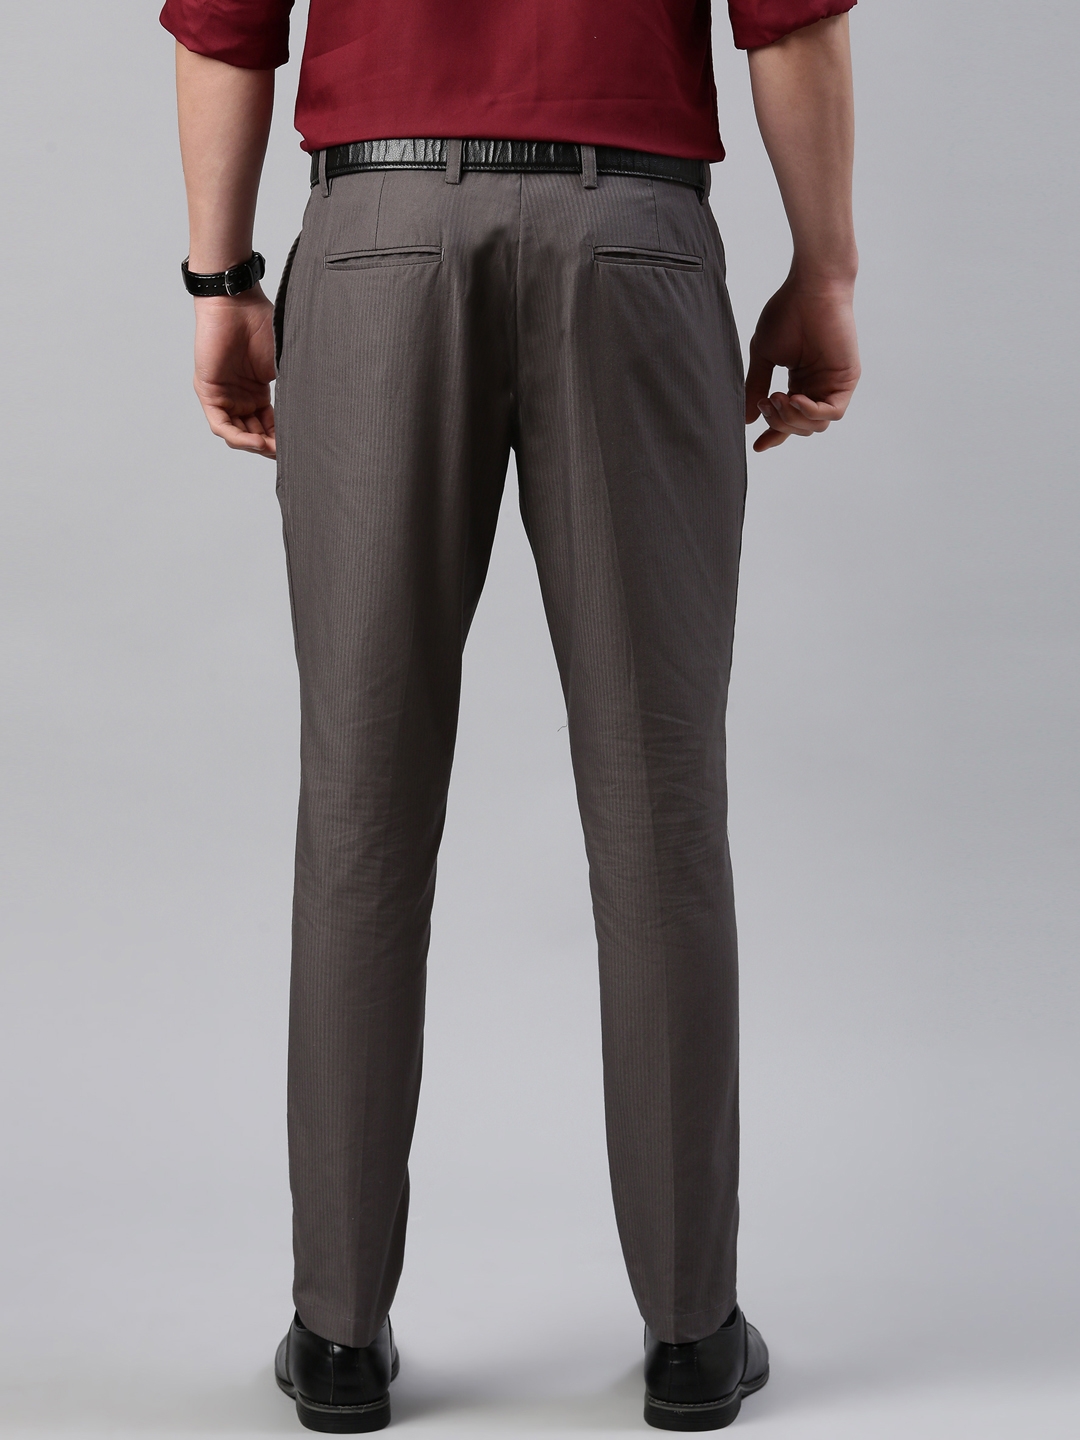 Roadster Trousers - Buy Roadster Trousers online in India